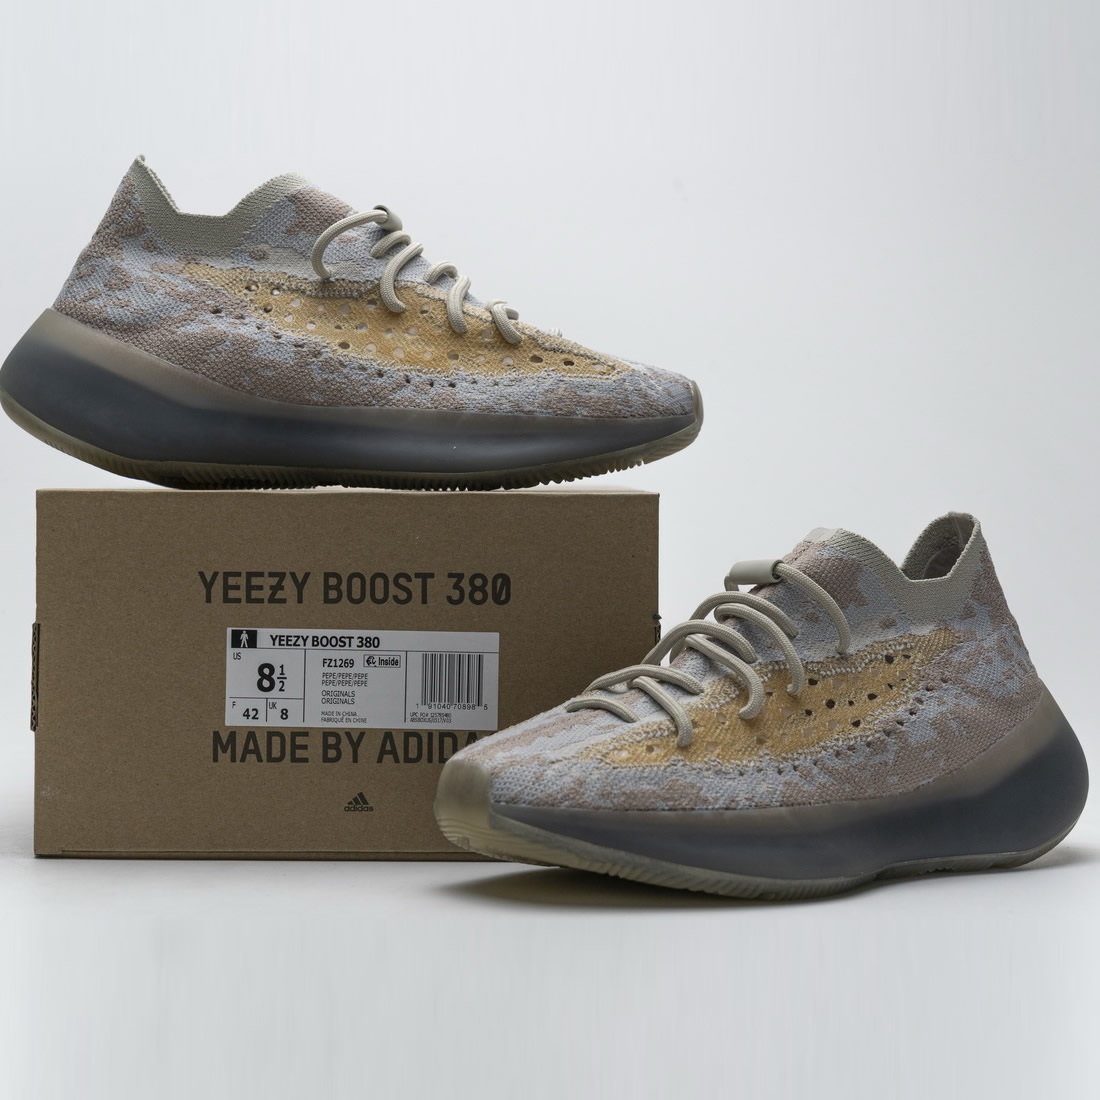 Adidas Yeezy Boost 380 Pepper Non Reflective Fz1269 New Release Date For Sale 5 - kickbulk.cc